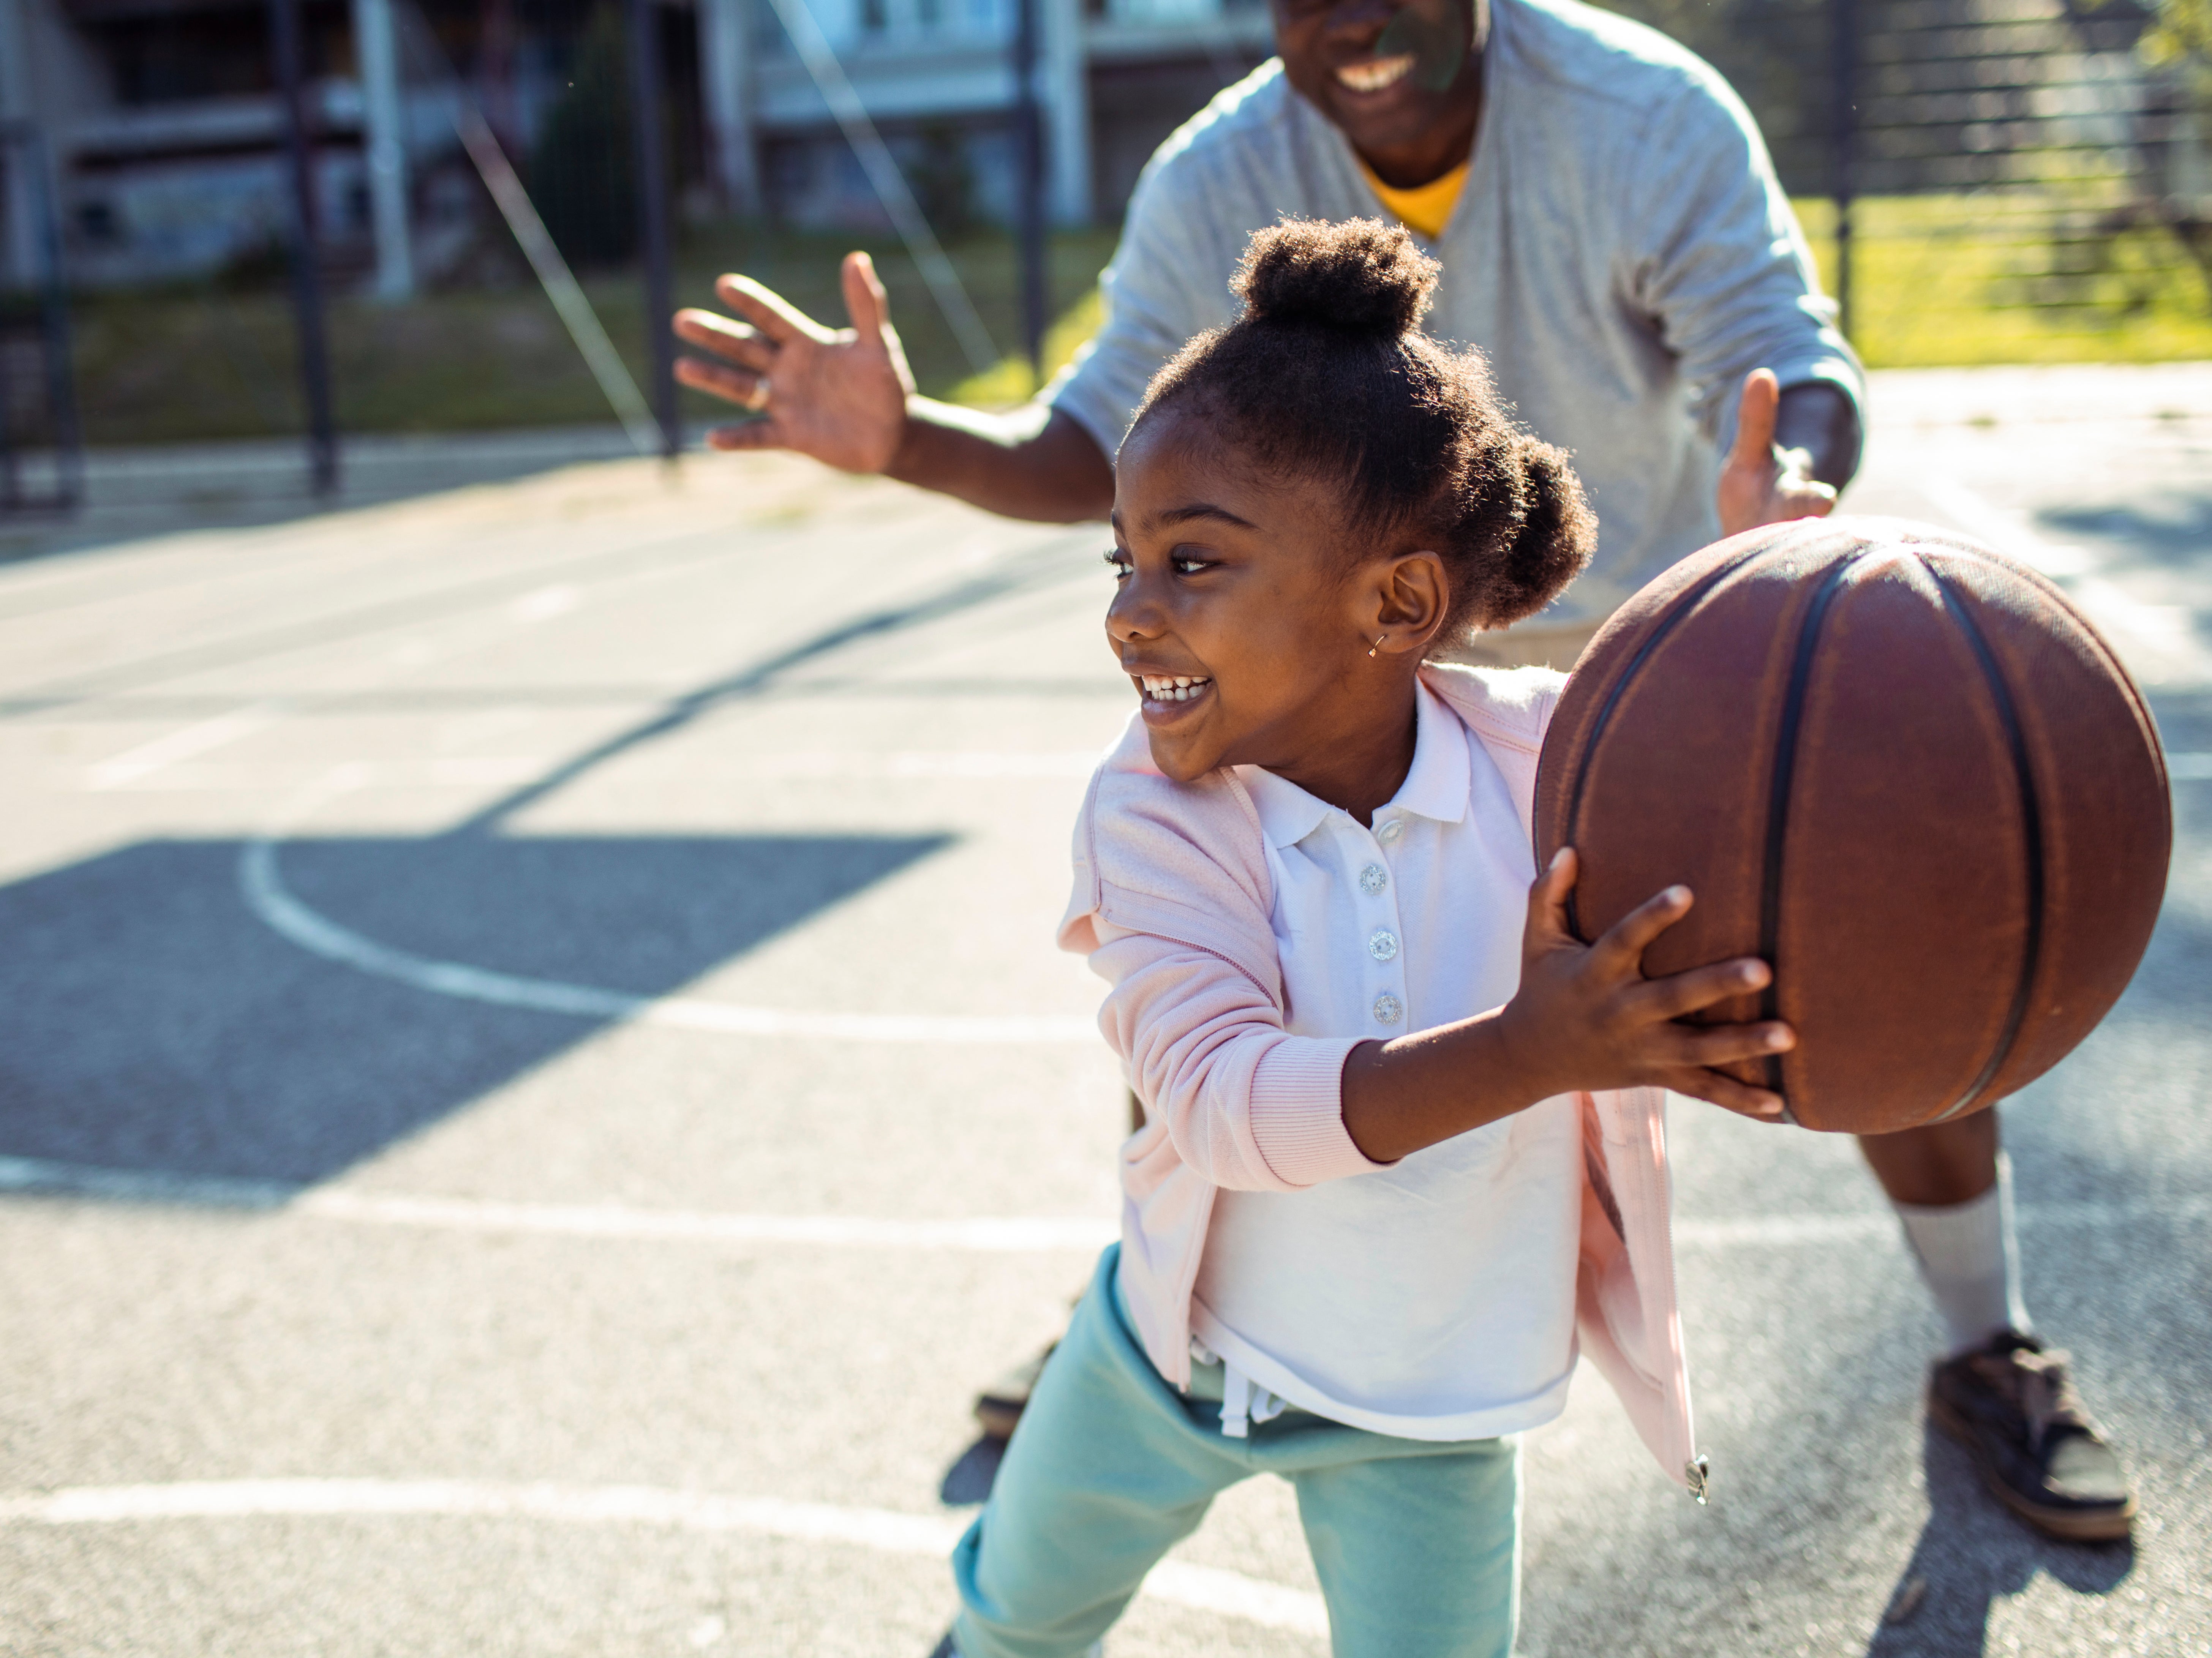 A father plays basketball with his young daughter